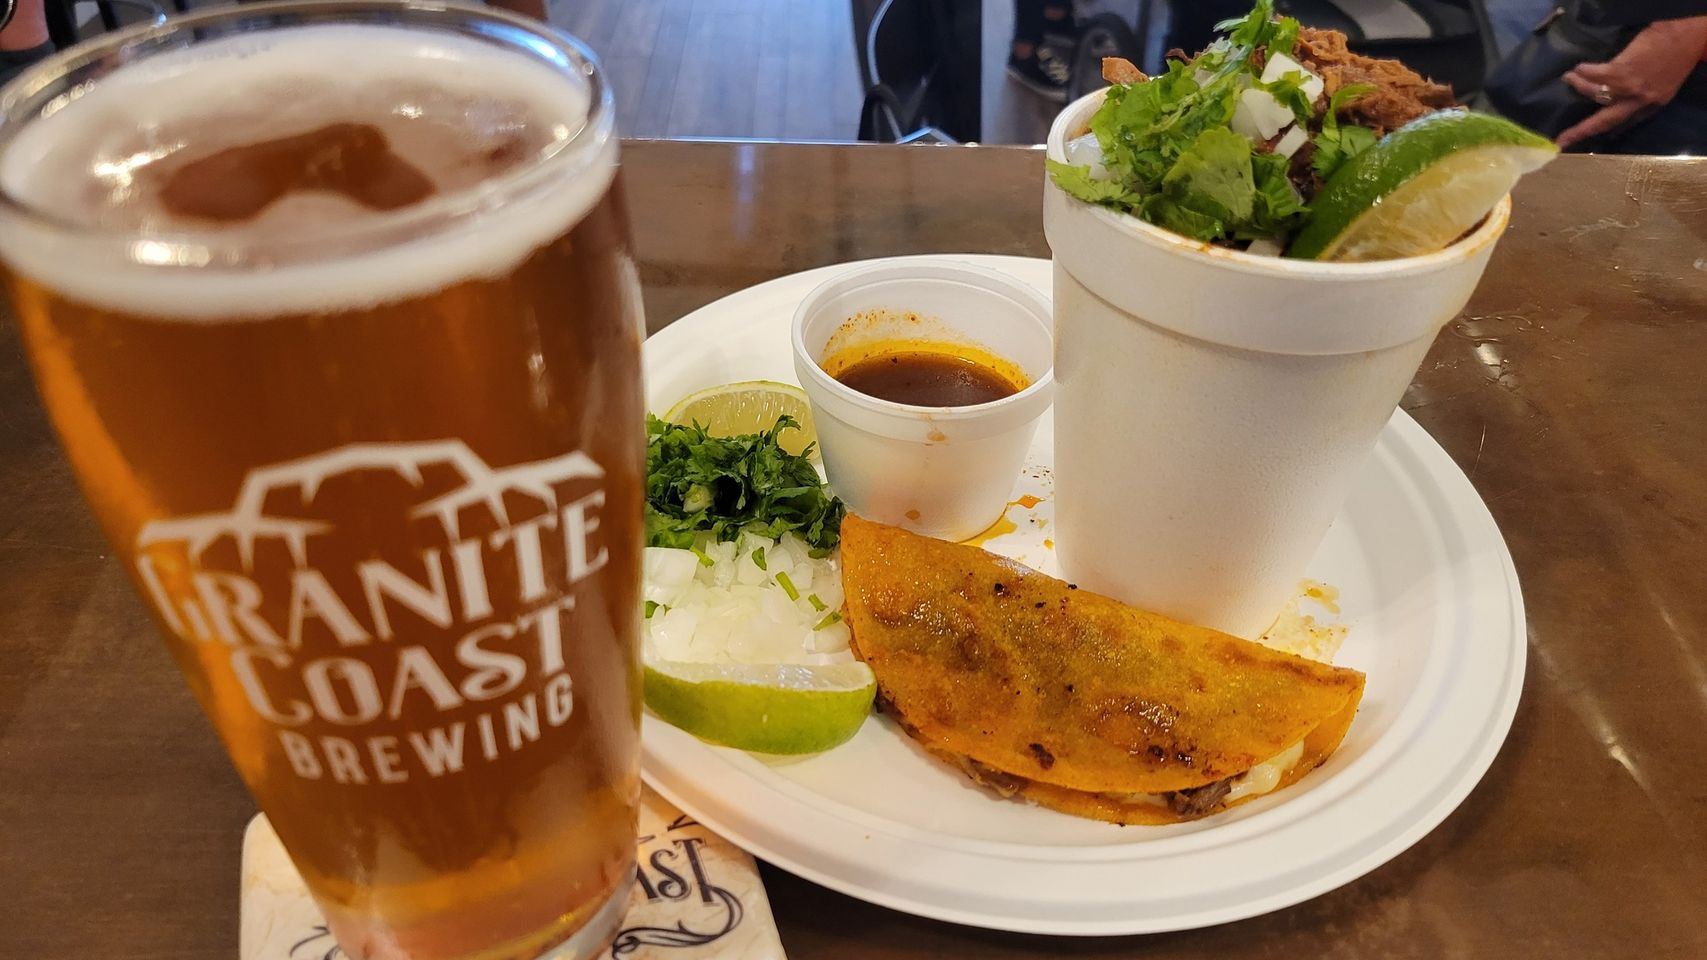 Enjoy a delicious meal paired perfectly with a refreshing glass of beer.